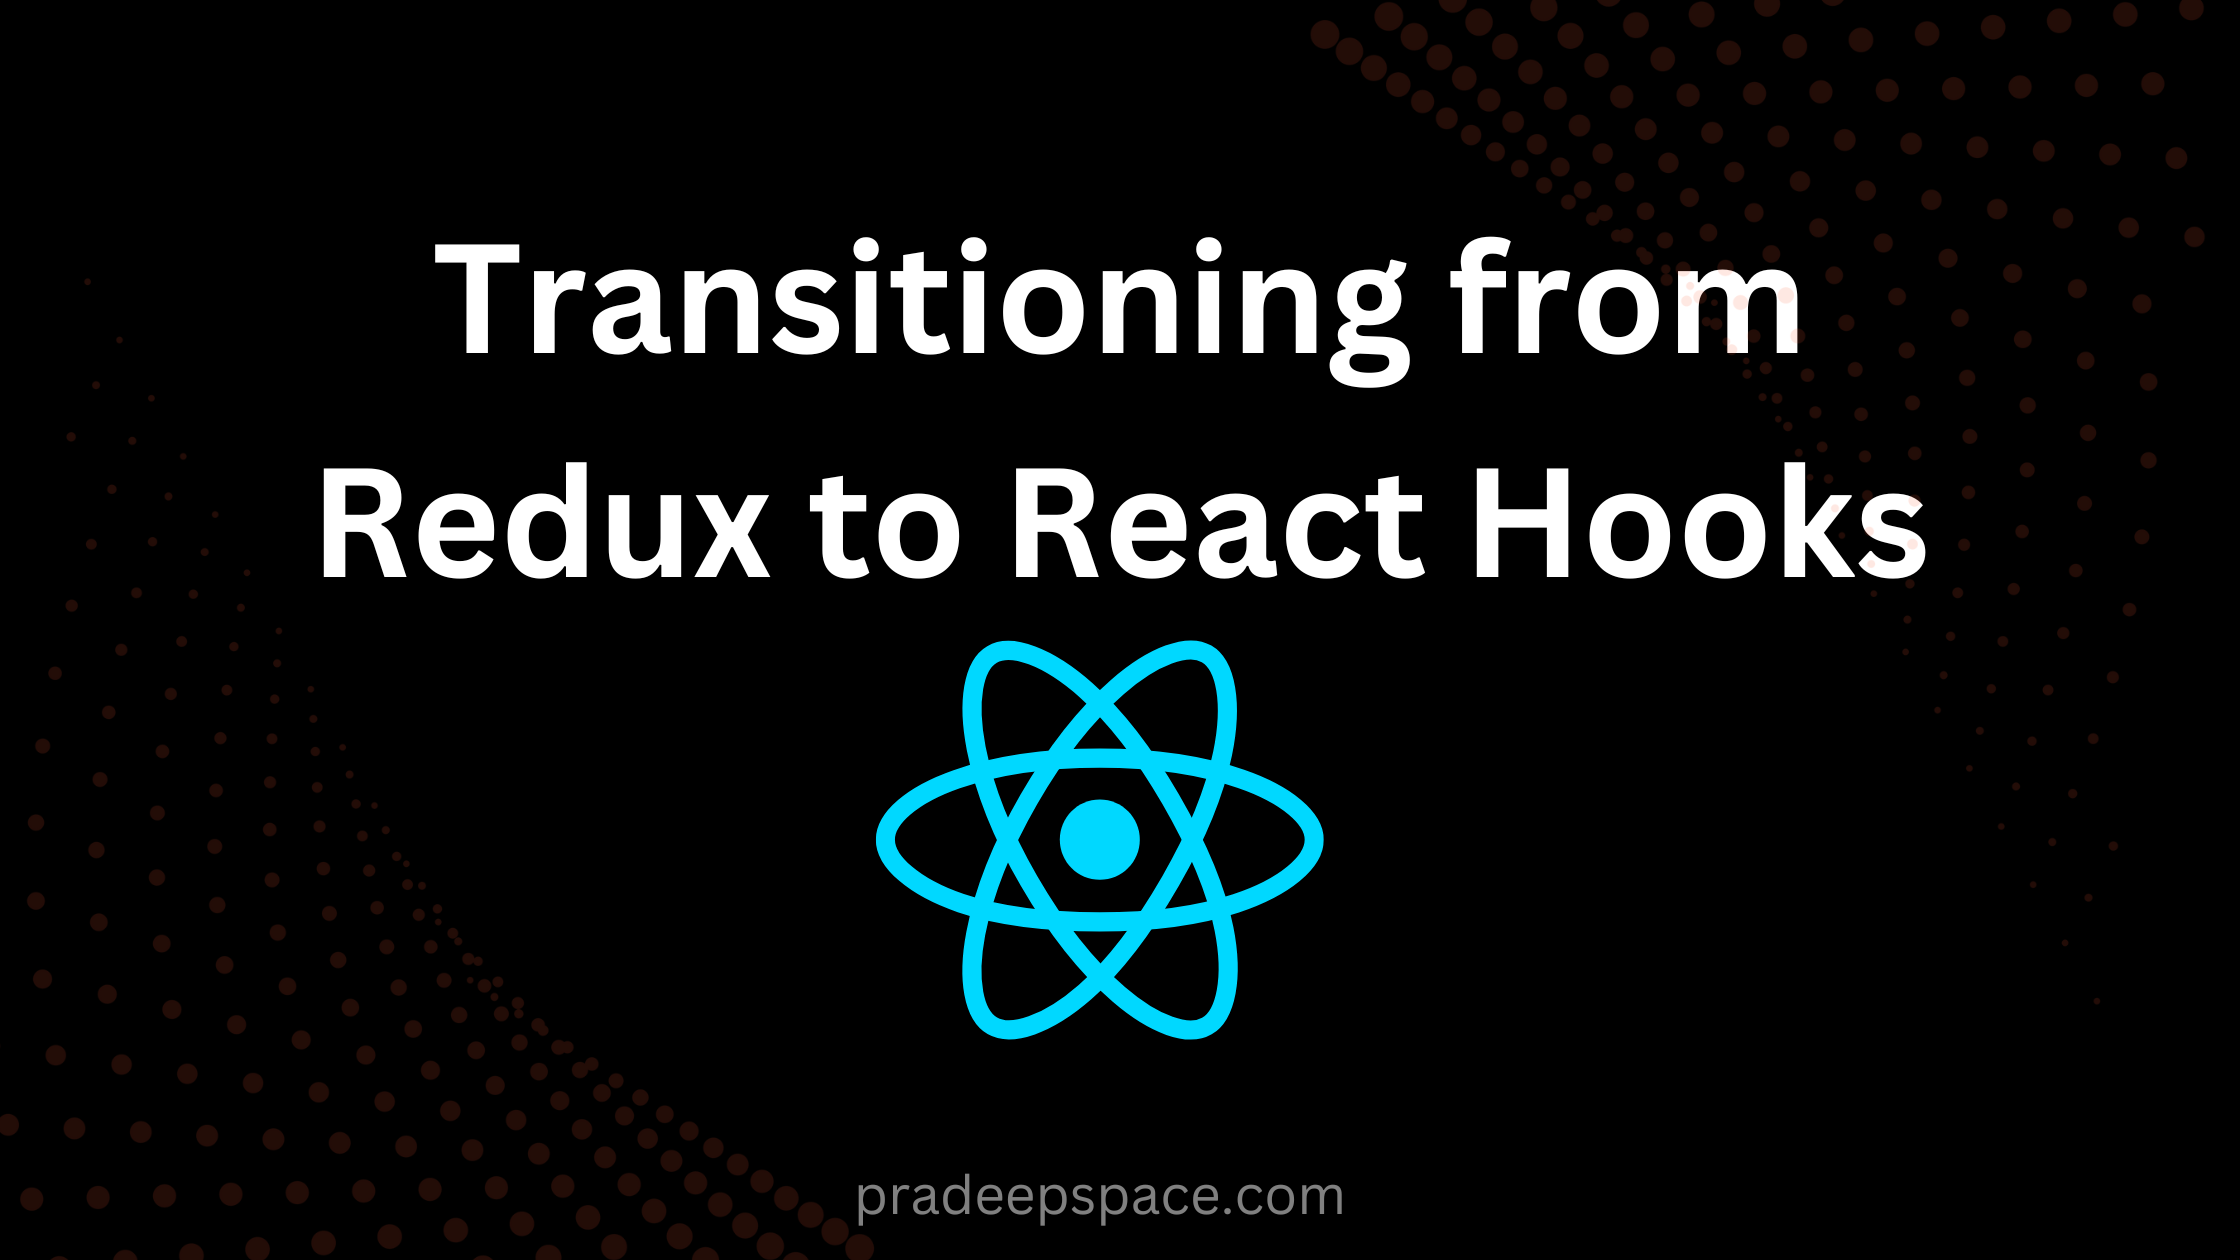 Transitioning from Redux to React Hooks in React.js